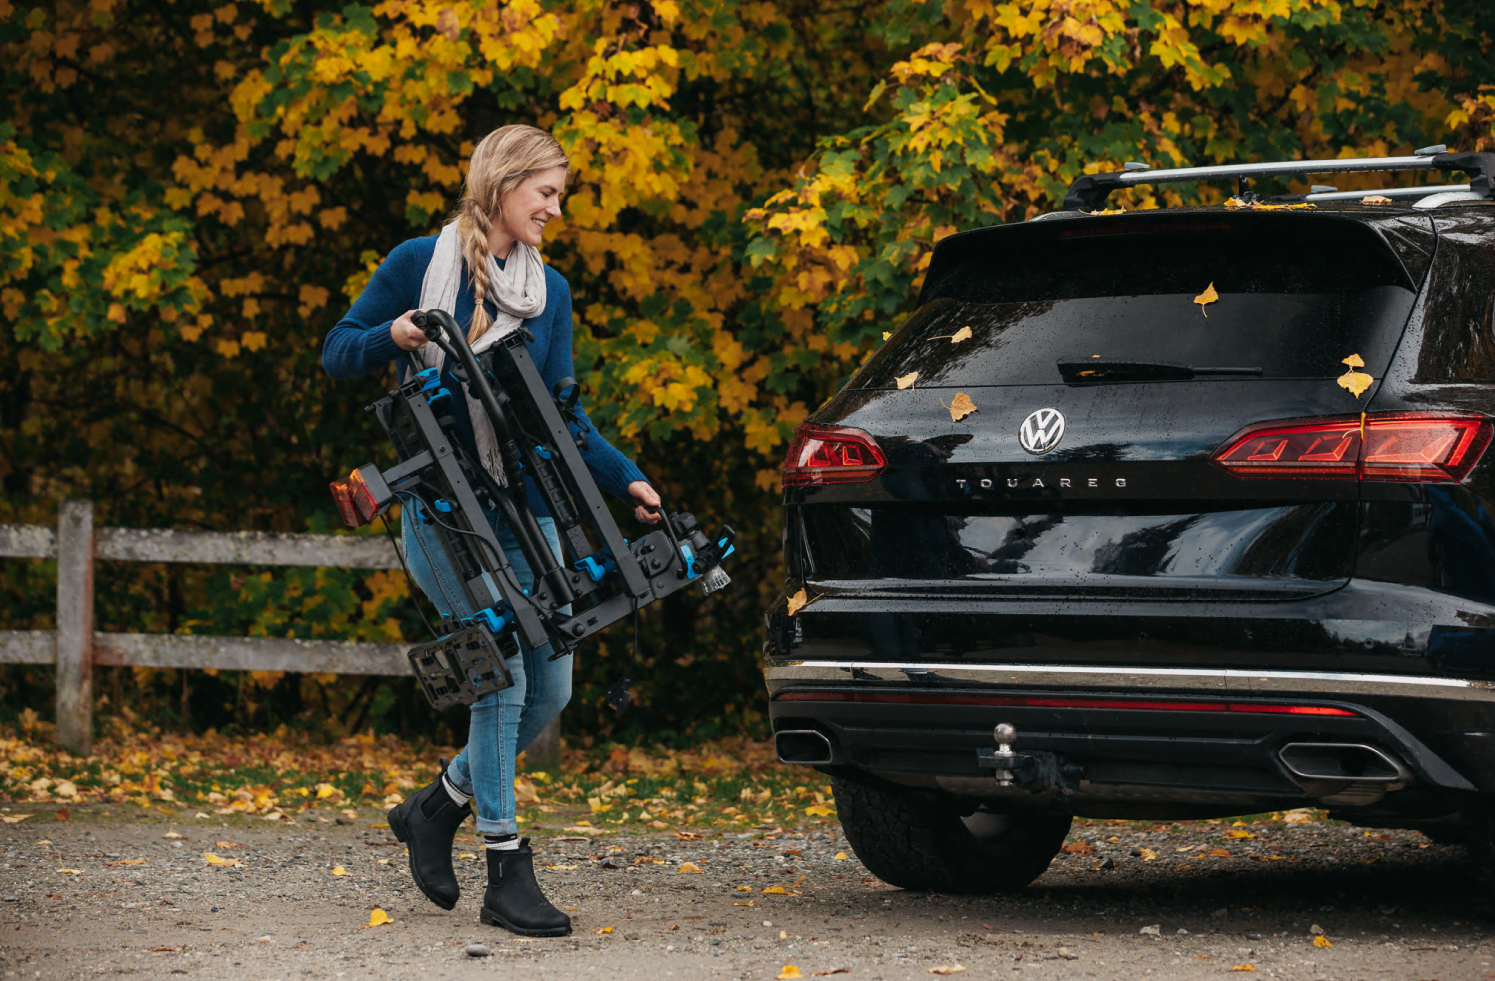 A woman carries the Ezigrip E-Rack 2 bike rack to the back of her SUV. The rack is folded and compact, sitting close to her body.